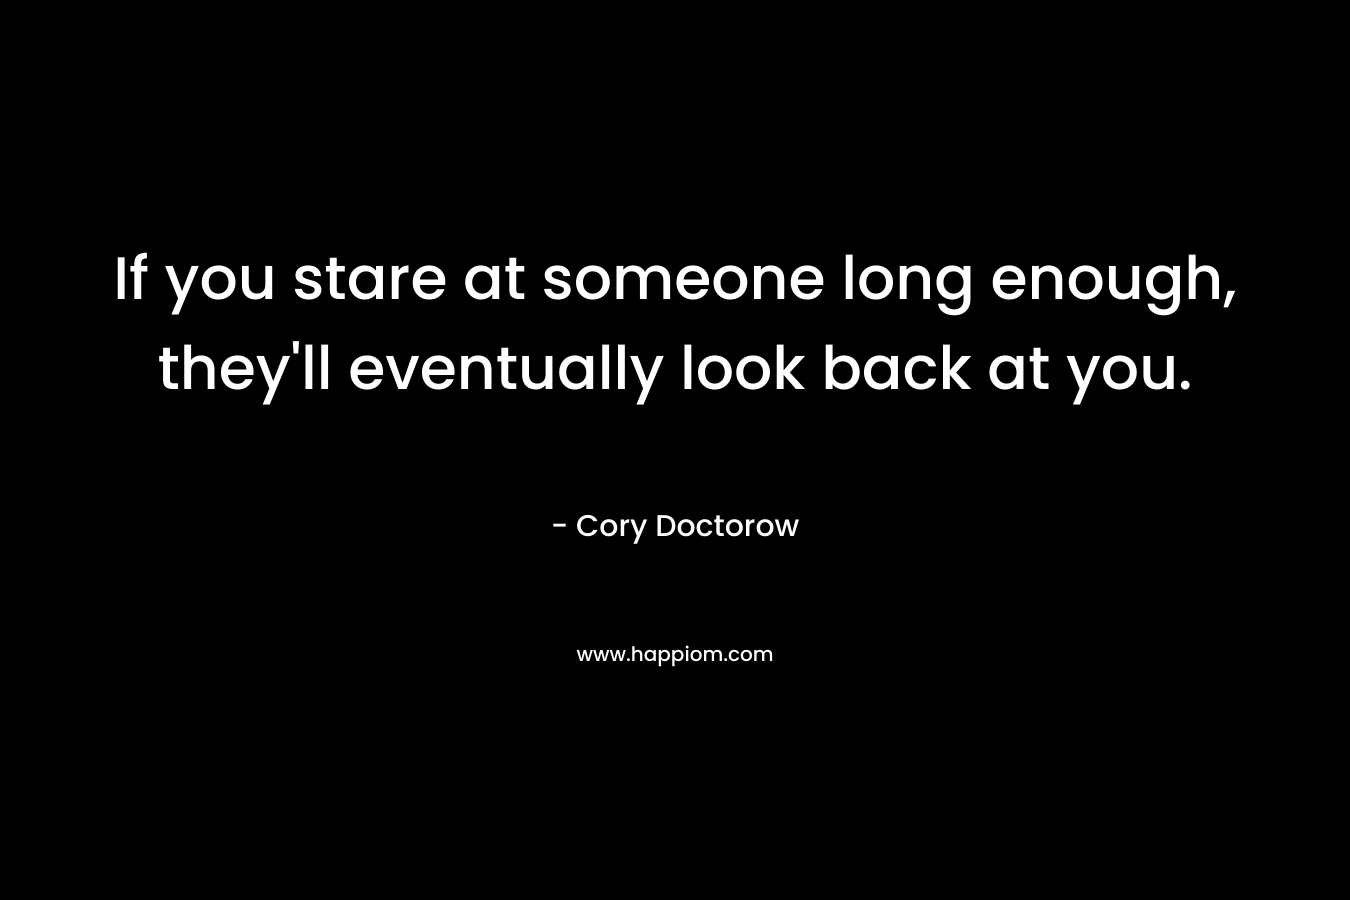 If you stare at someone long enough, they’ll eventually look back at you. – Cory Doctorow